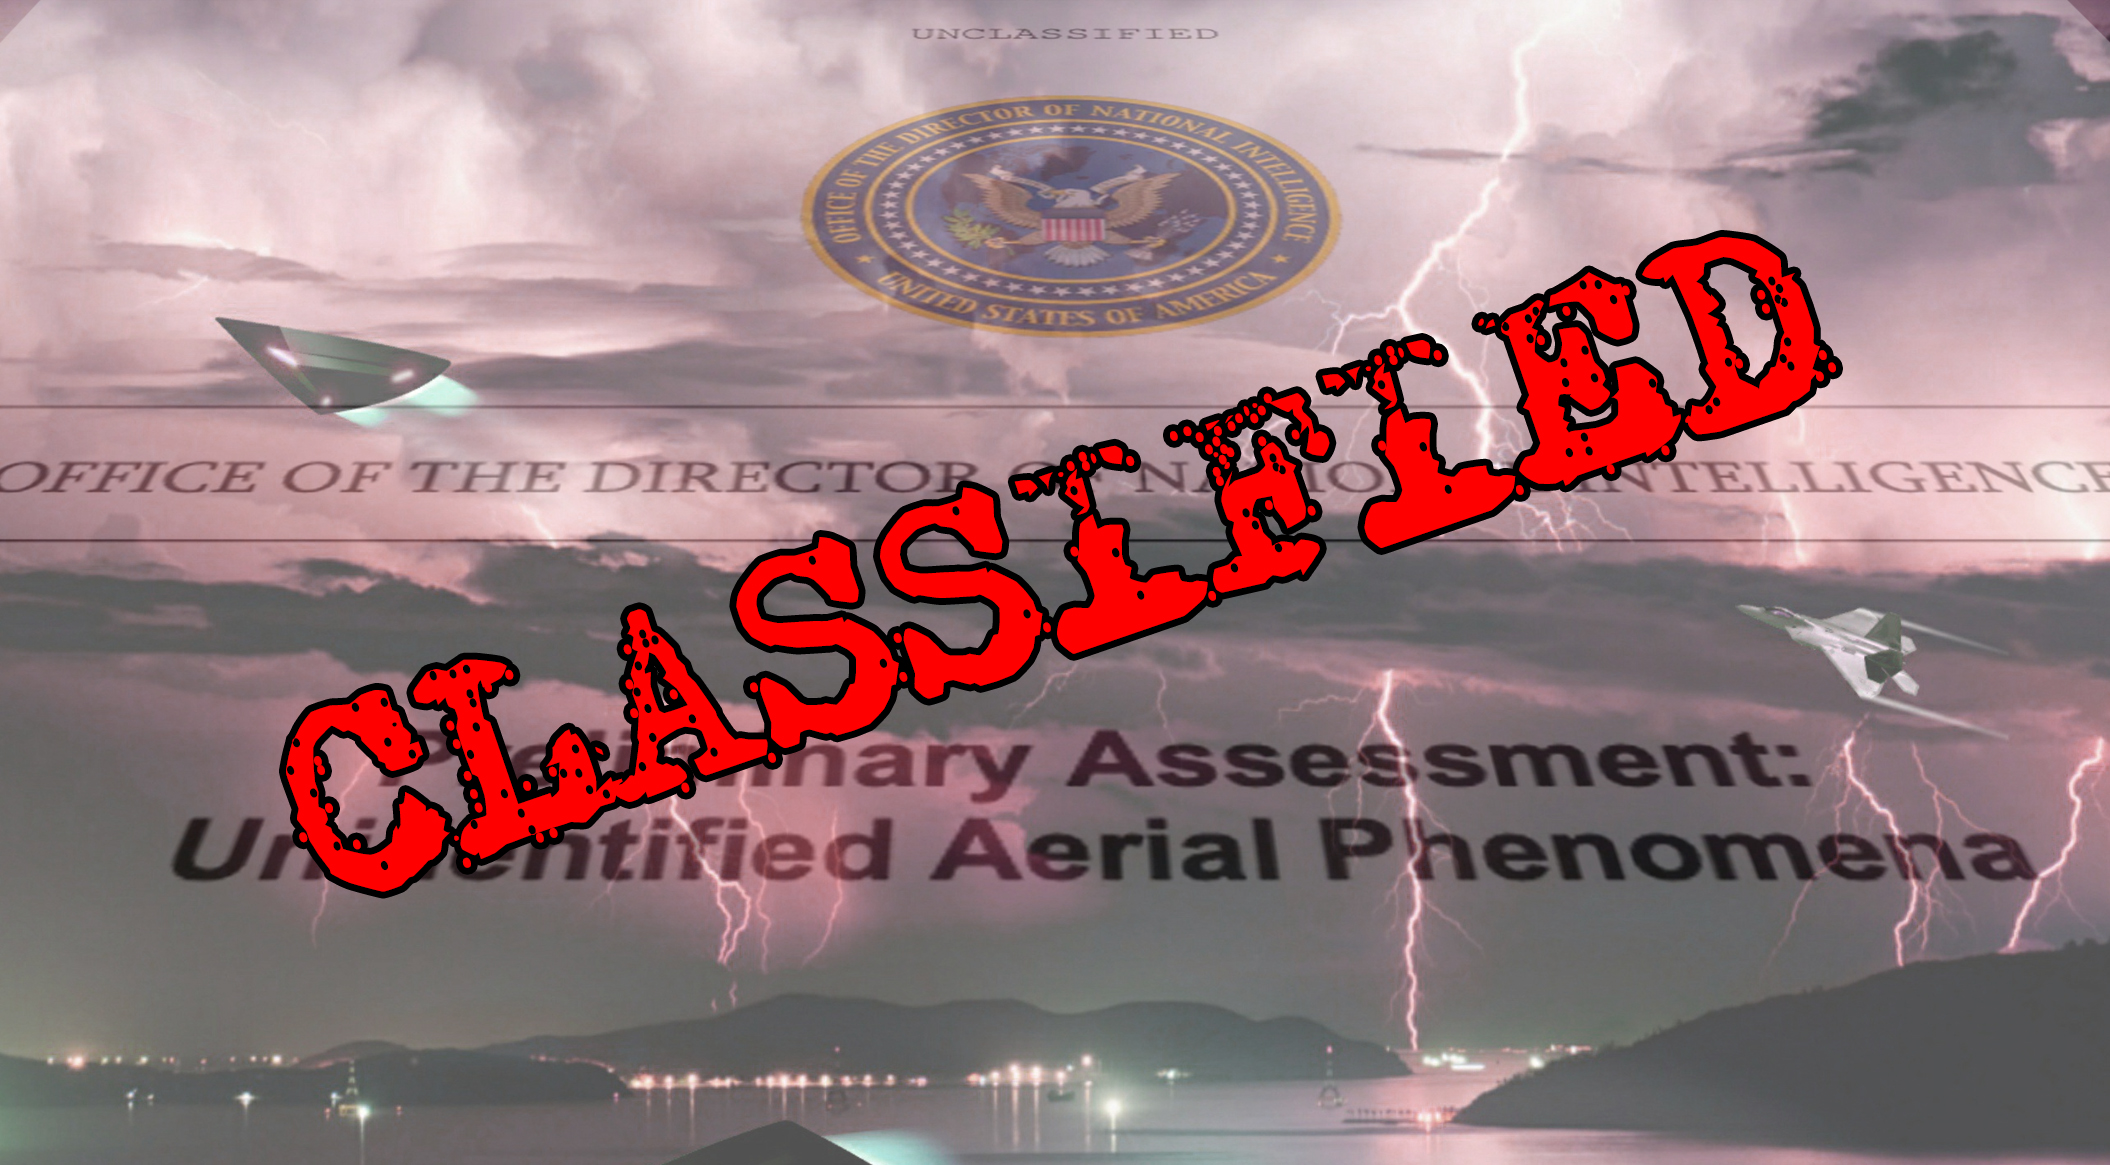 June 2021 Classified UAP / UFO Report Given to Congress Partially Released